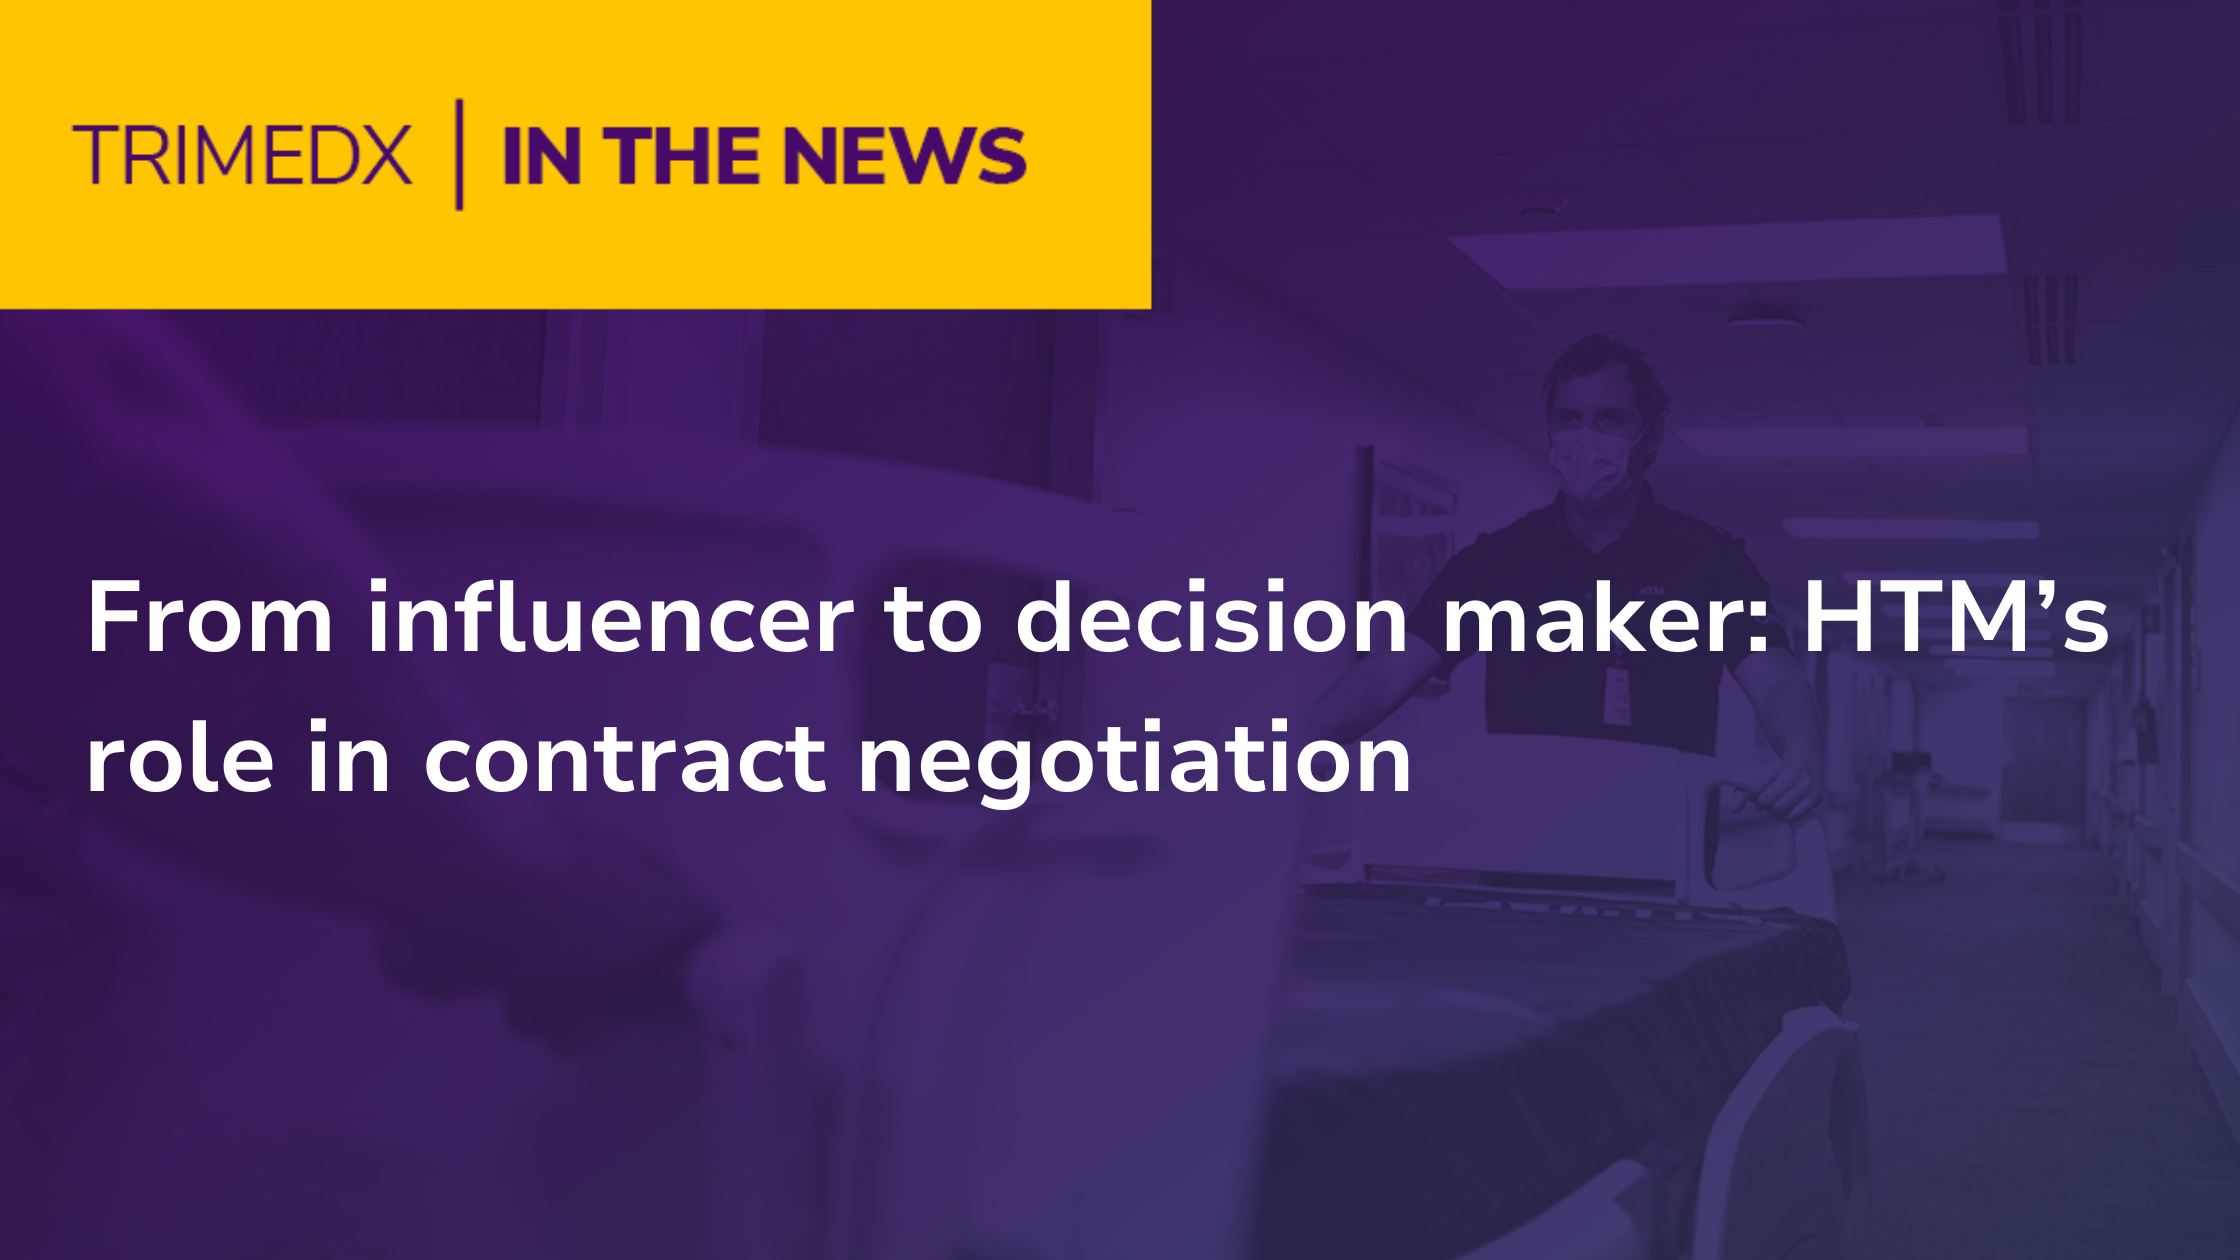 TRIMEDX in the News: From influencer to decision maker: HTM’s role in contract negotiation